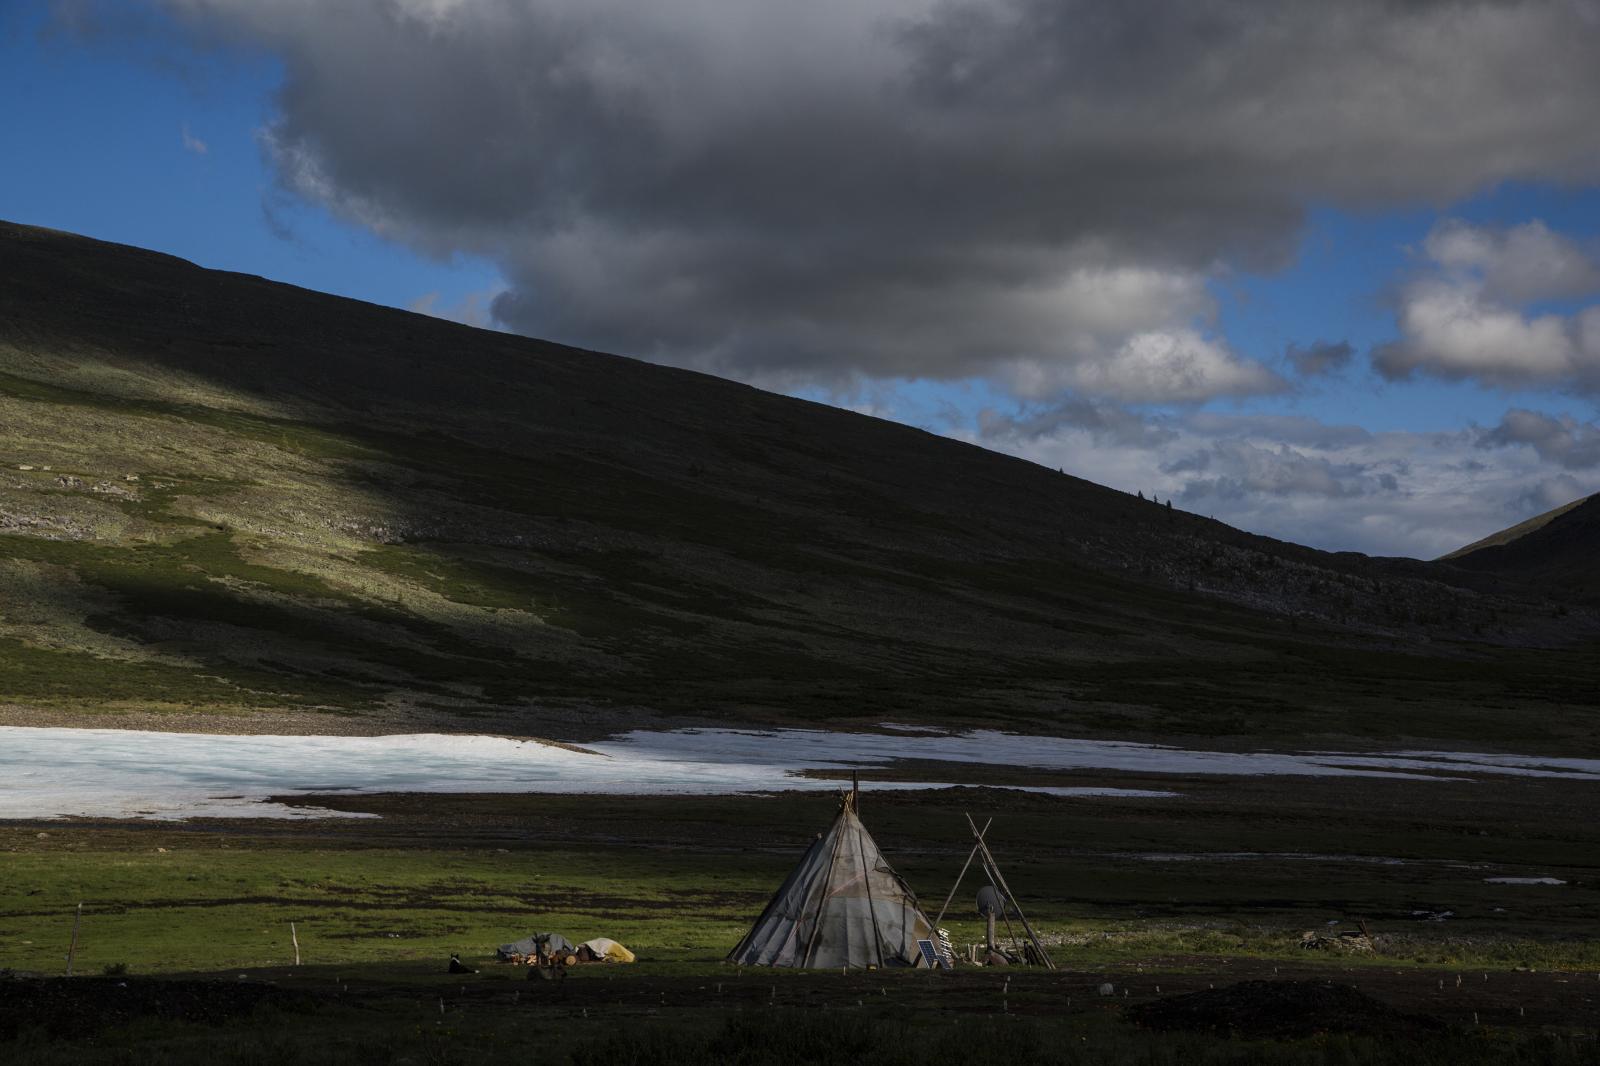 Tsaatan - Tipi in a camp in the Mongol taiga. The tipi is the...